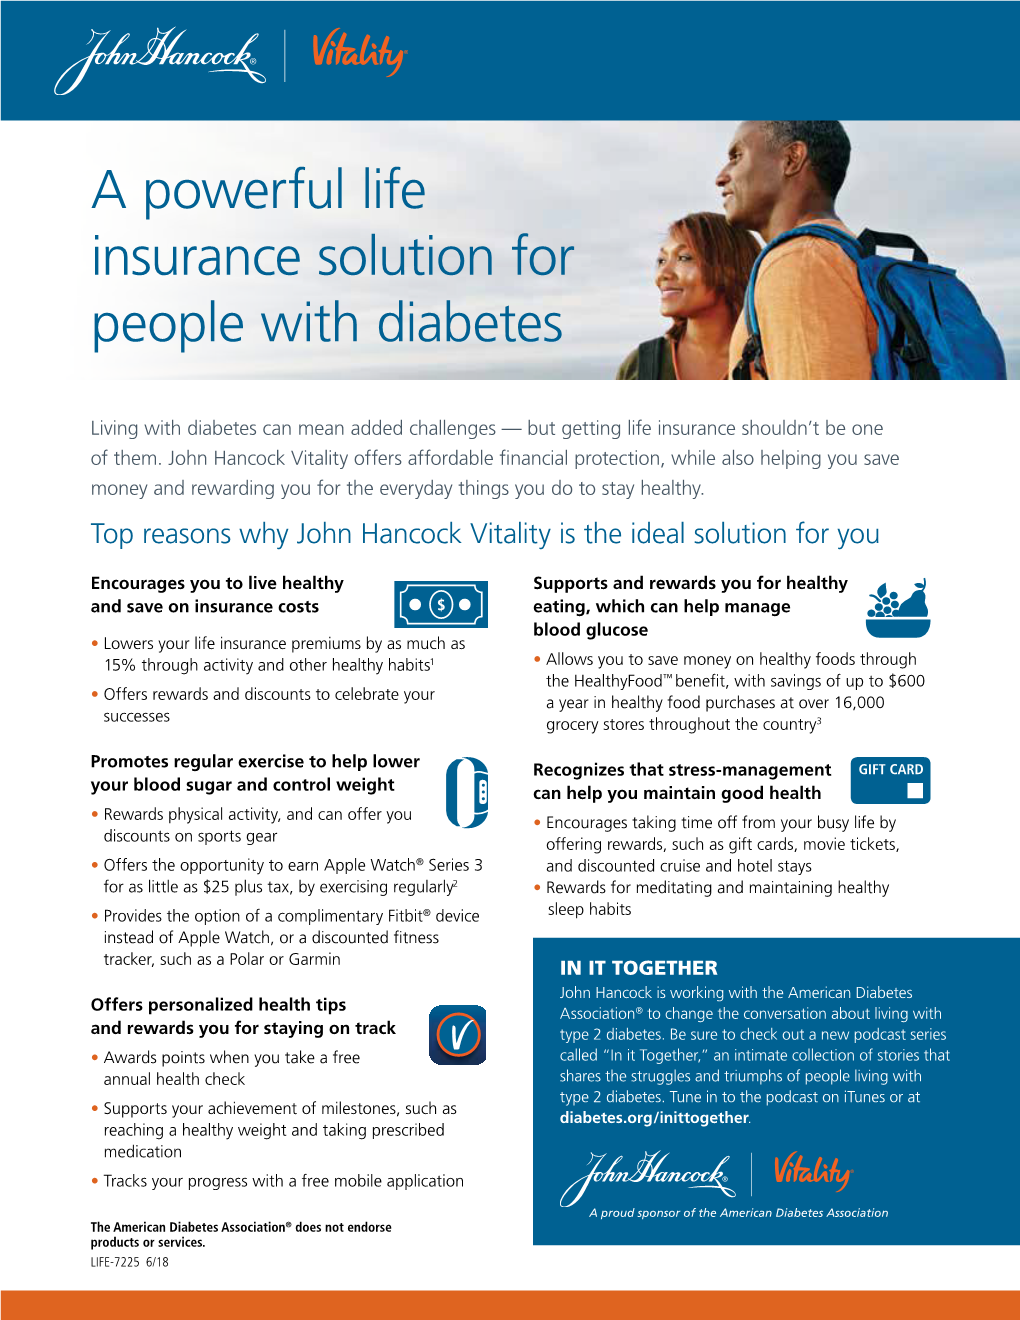 A Powerful Life Insurance Solution for People with Diabetes